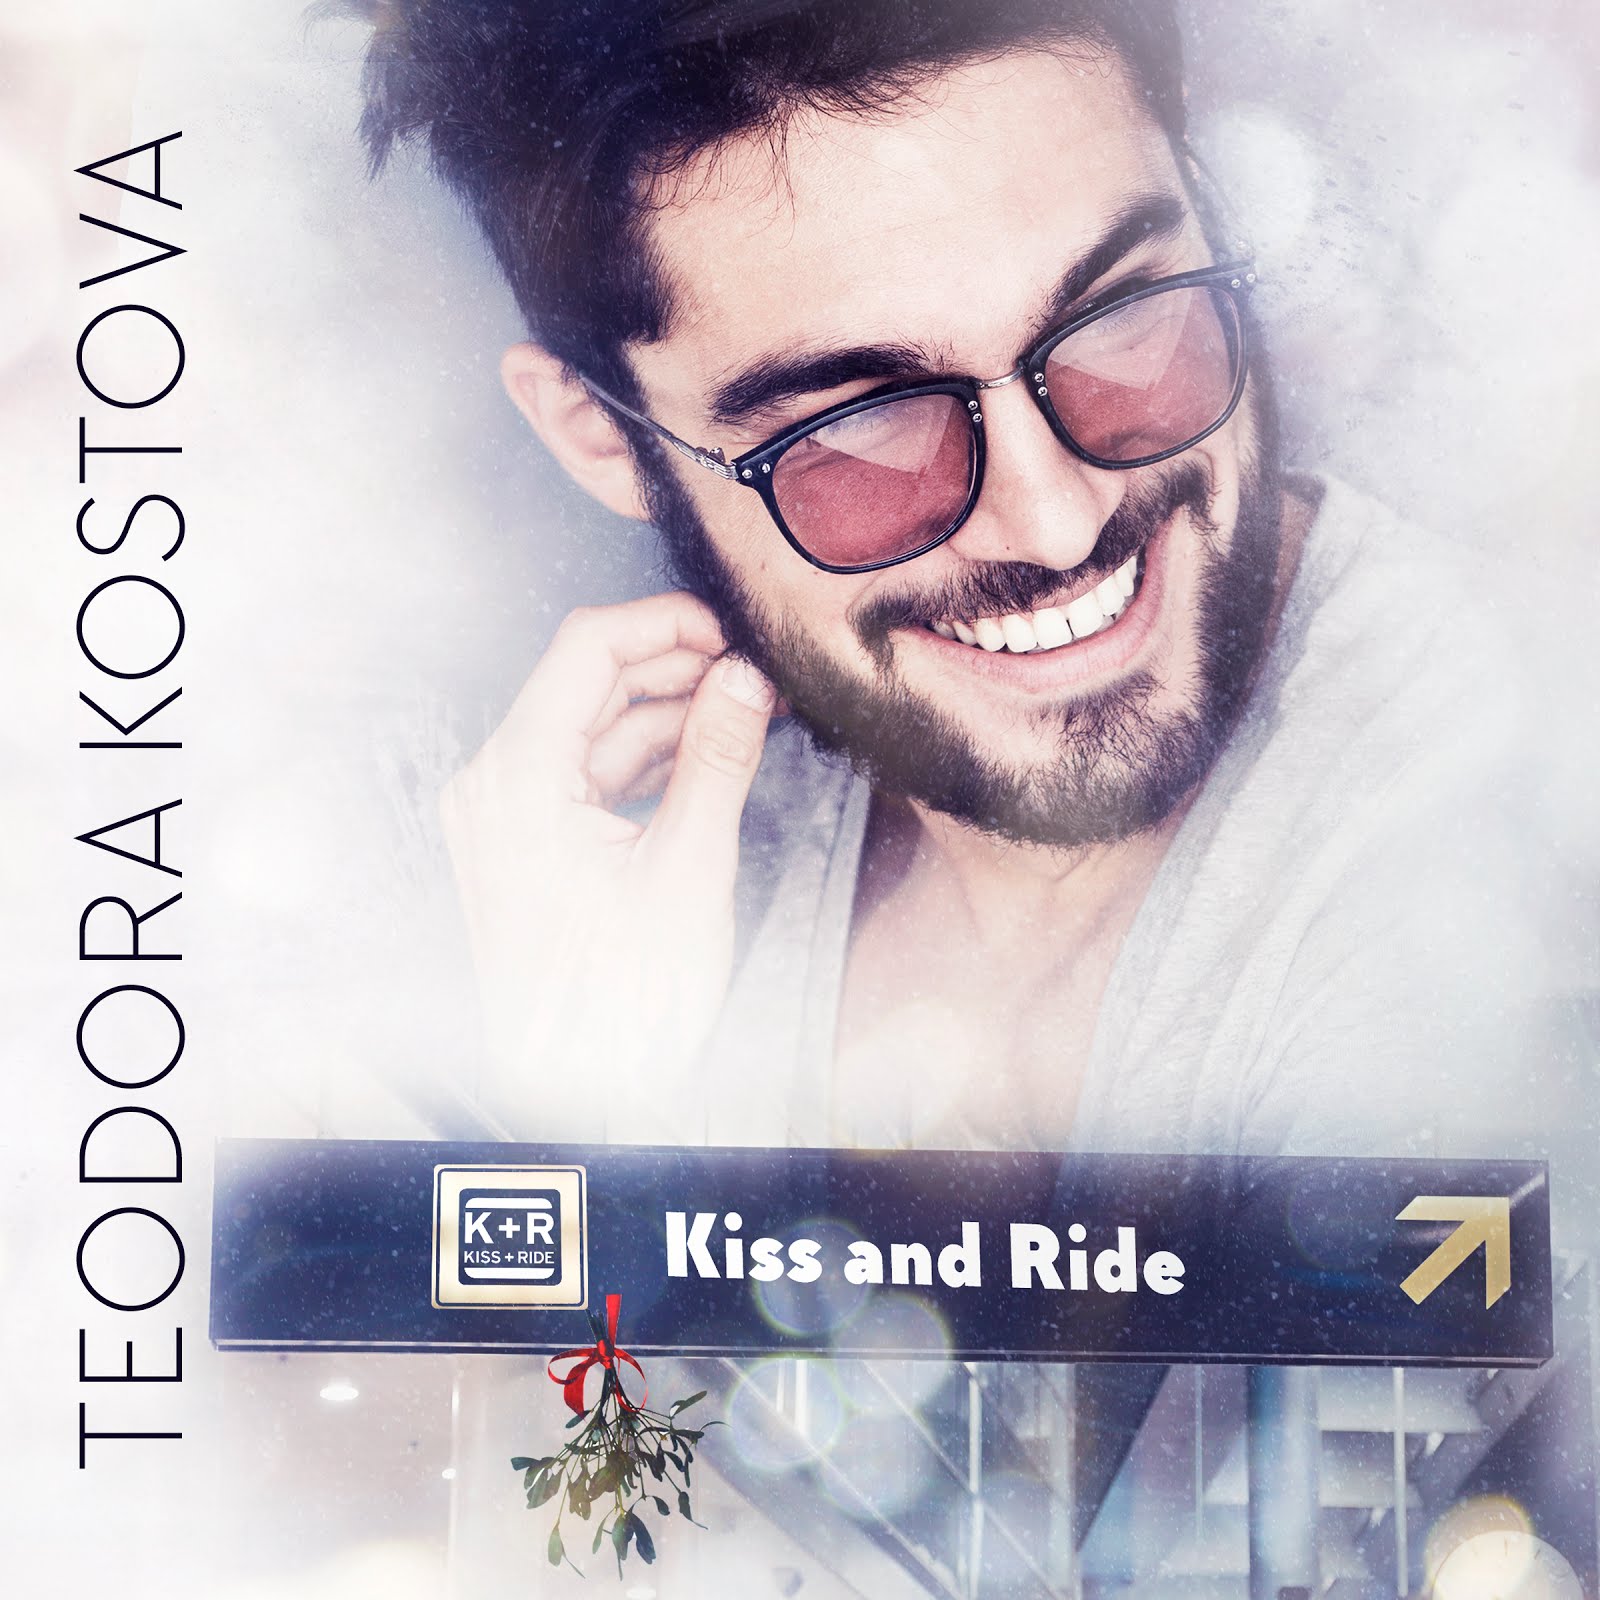 Kiss and Ride audio book